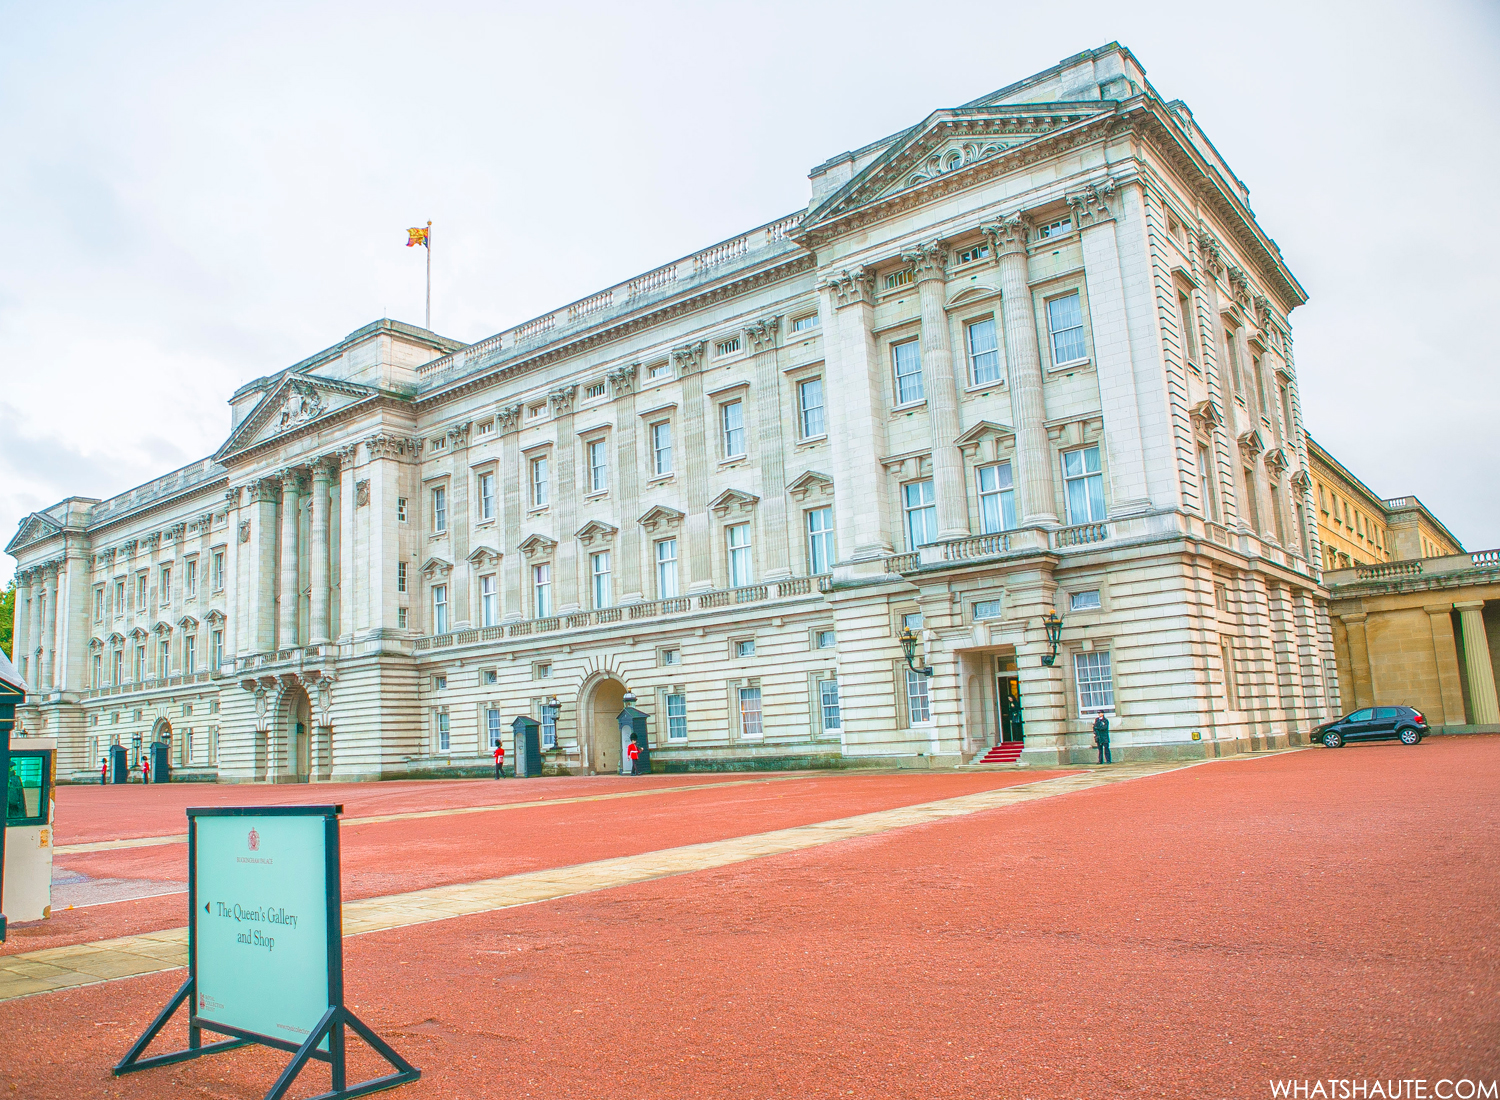 Buckingham Palace - London, England, What's Haute in the World